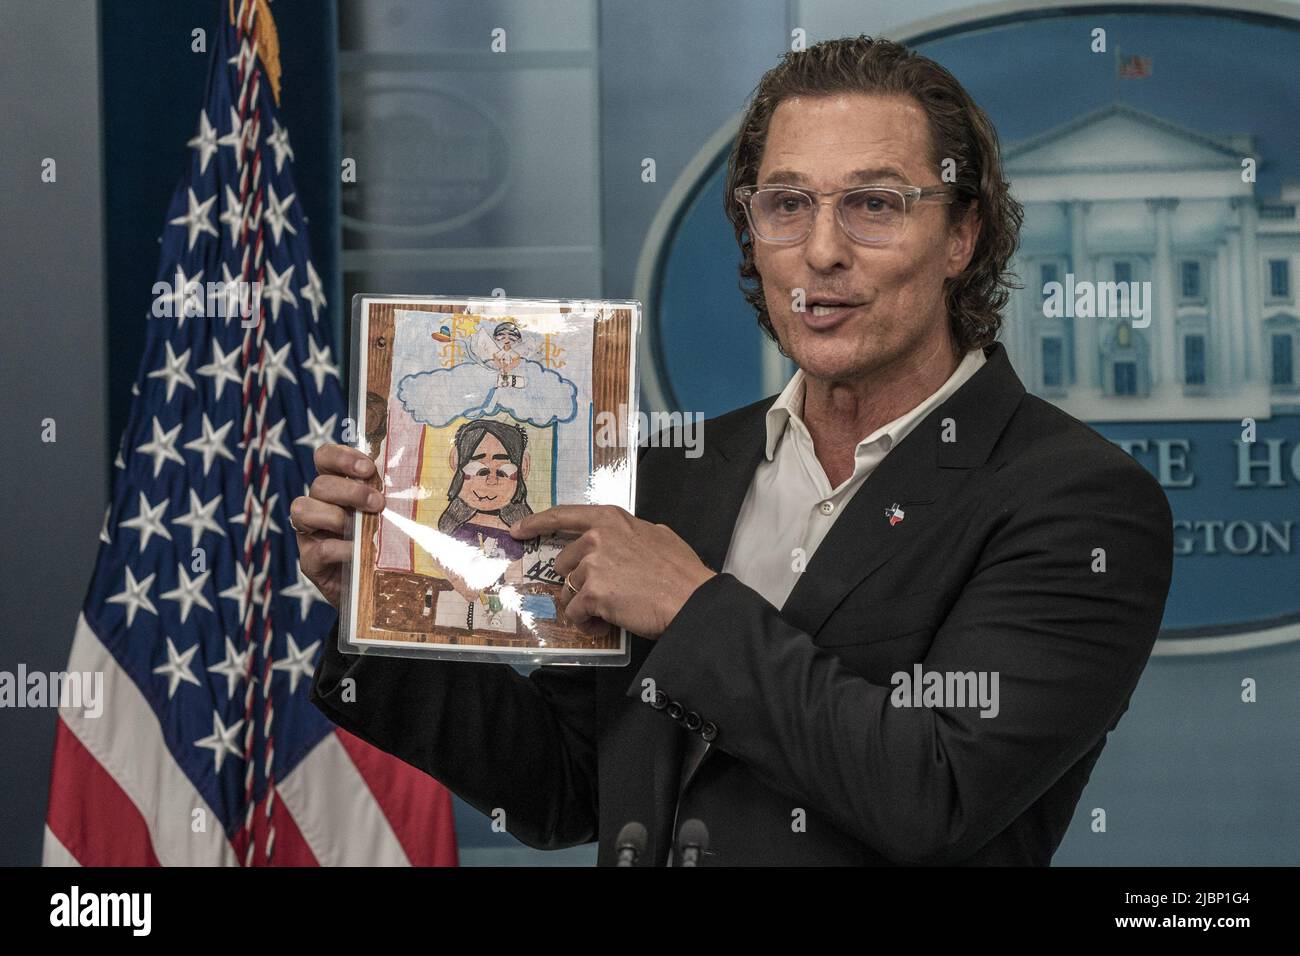 Washington, United States. 07th June, 2022. Matthew McConaughey, a native of Uvalde, Texas, holds up artwork by one of the victims of the mass shooting at Robb Elementary School shooting at a press conference on gun violence in the James S. Brady Press Briefing Room at the White House in Washington, DC on Tuesday, June 7, 2022. Photo by Ken Cedeno/UPI . Credit: UPI/Alamy Live News Stock Photo